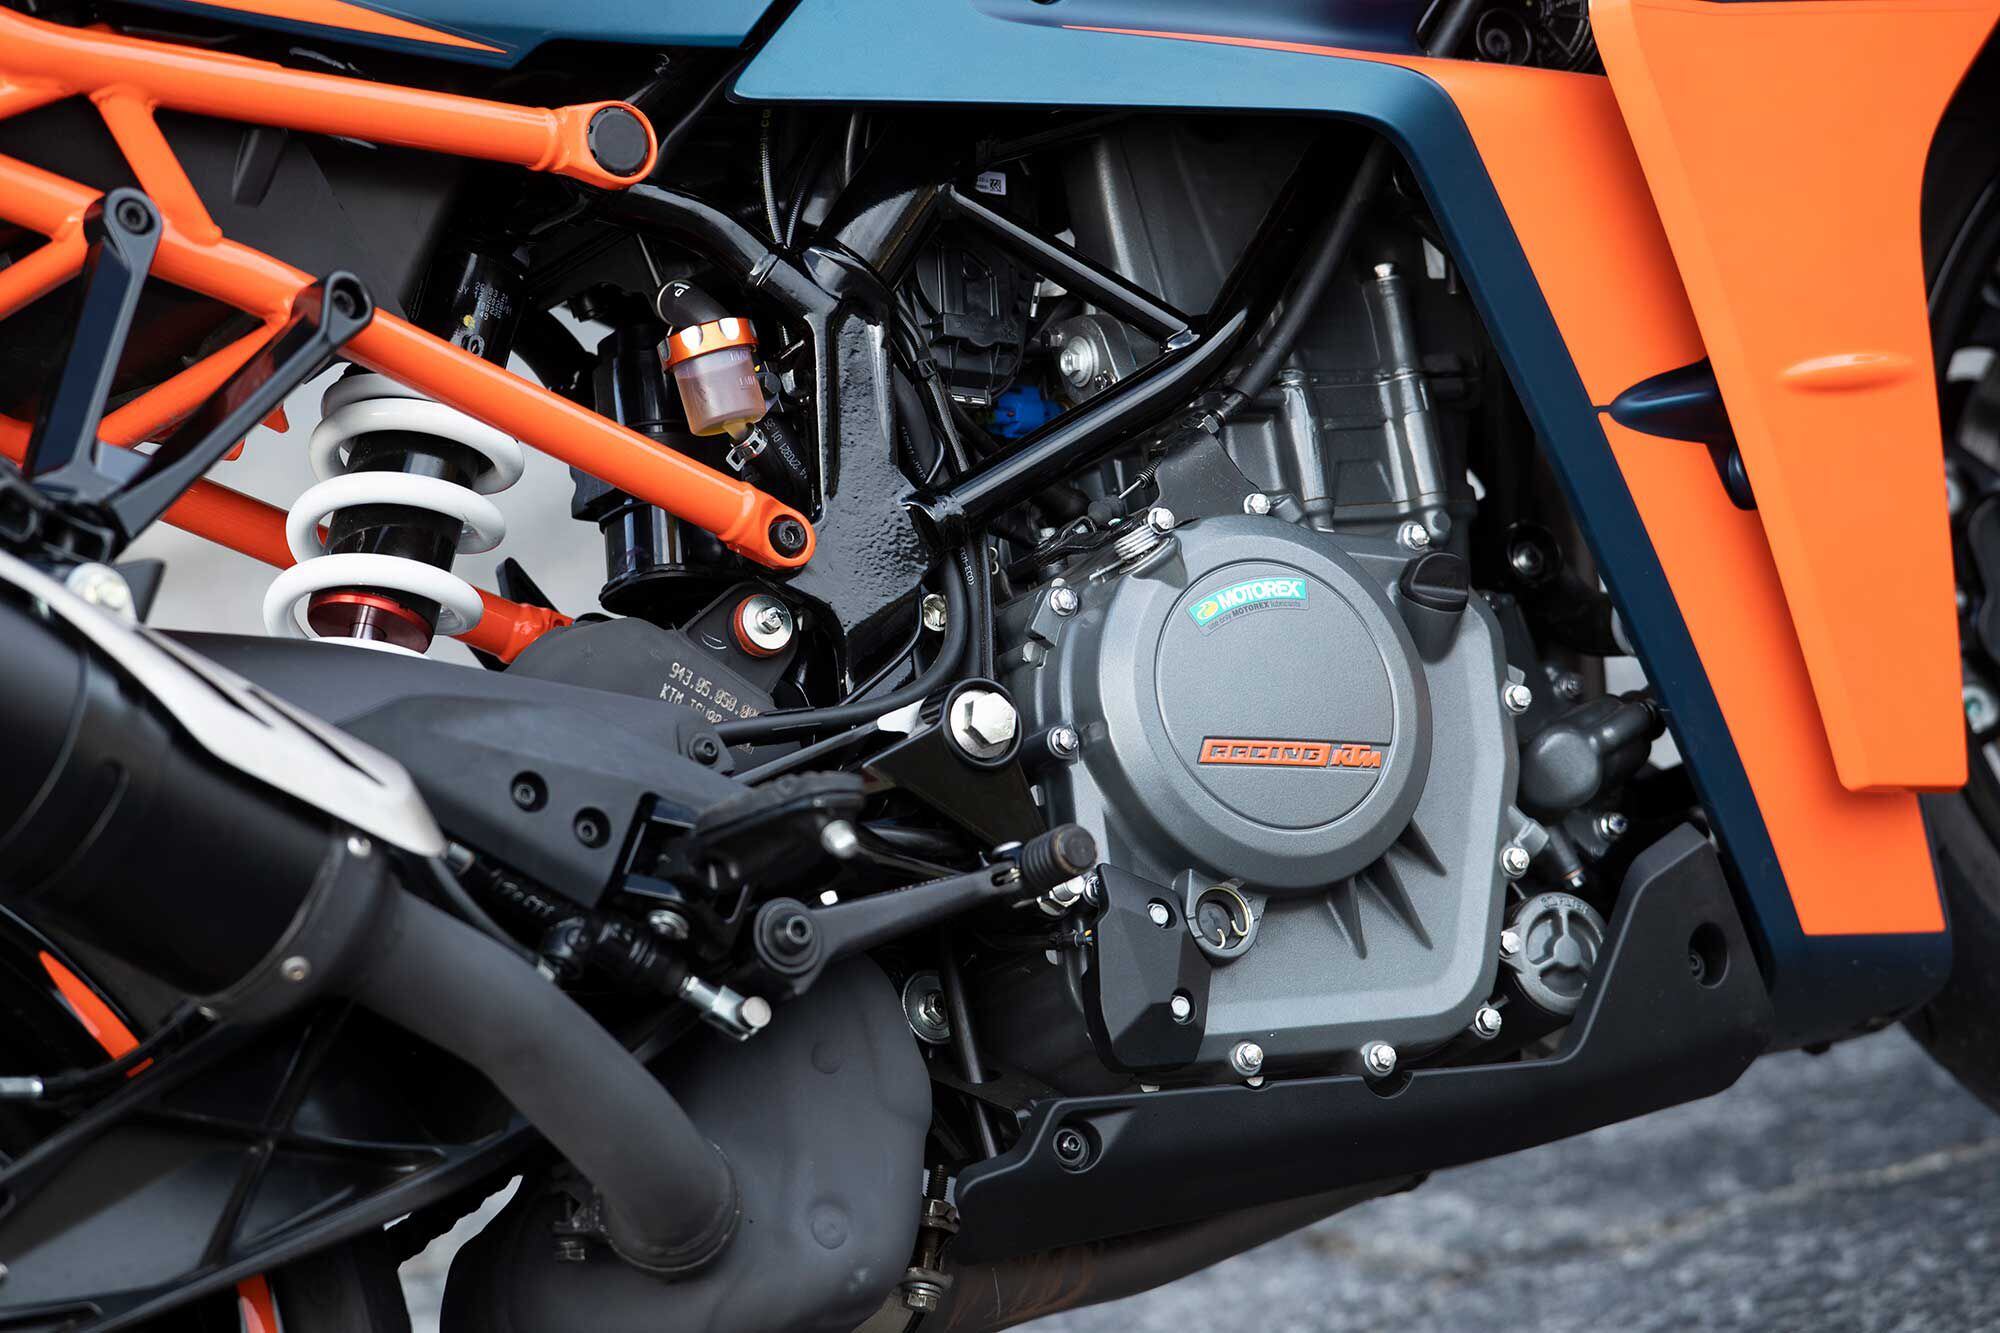 A 373cc single powers the RC 390, putting out 40.2 rear-wheel horsepower and 24.4 pound-feet of torque.